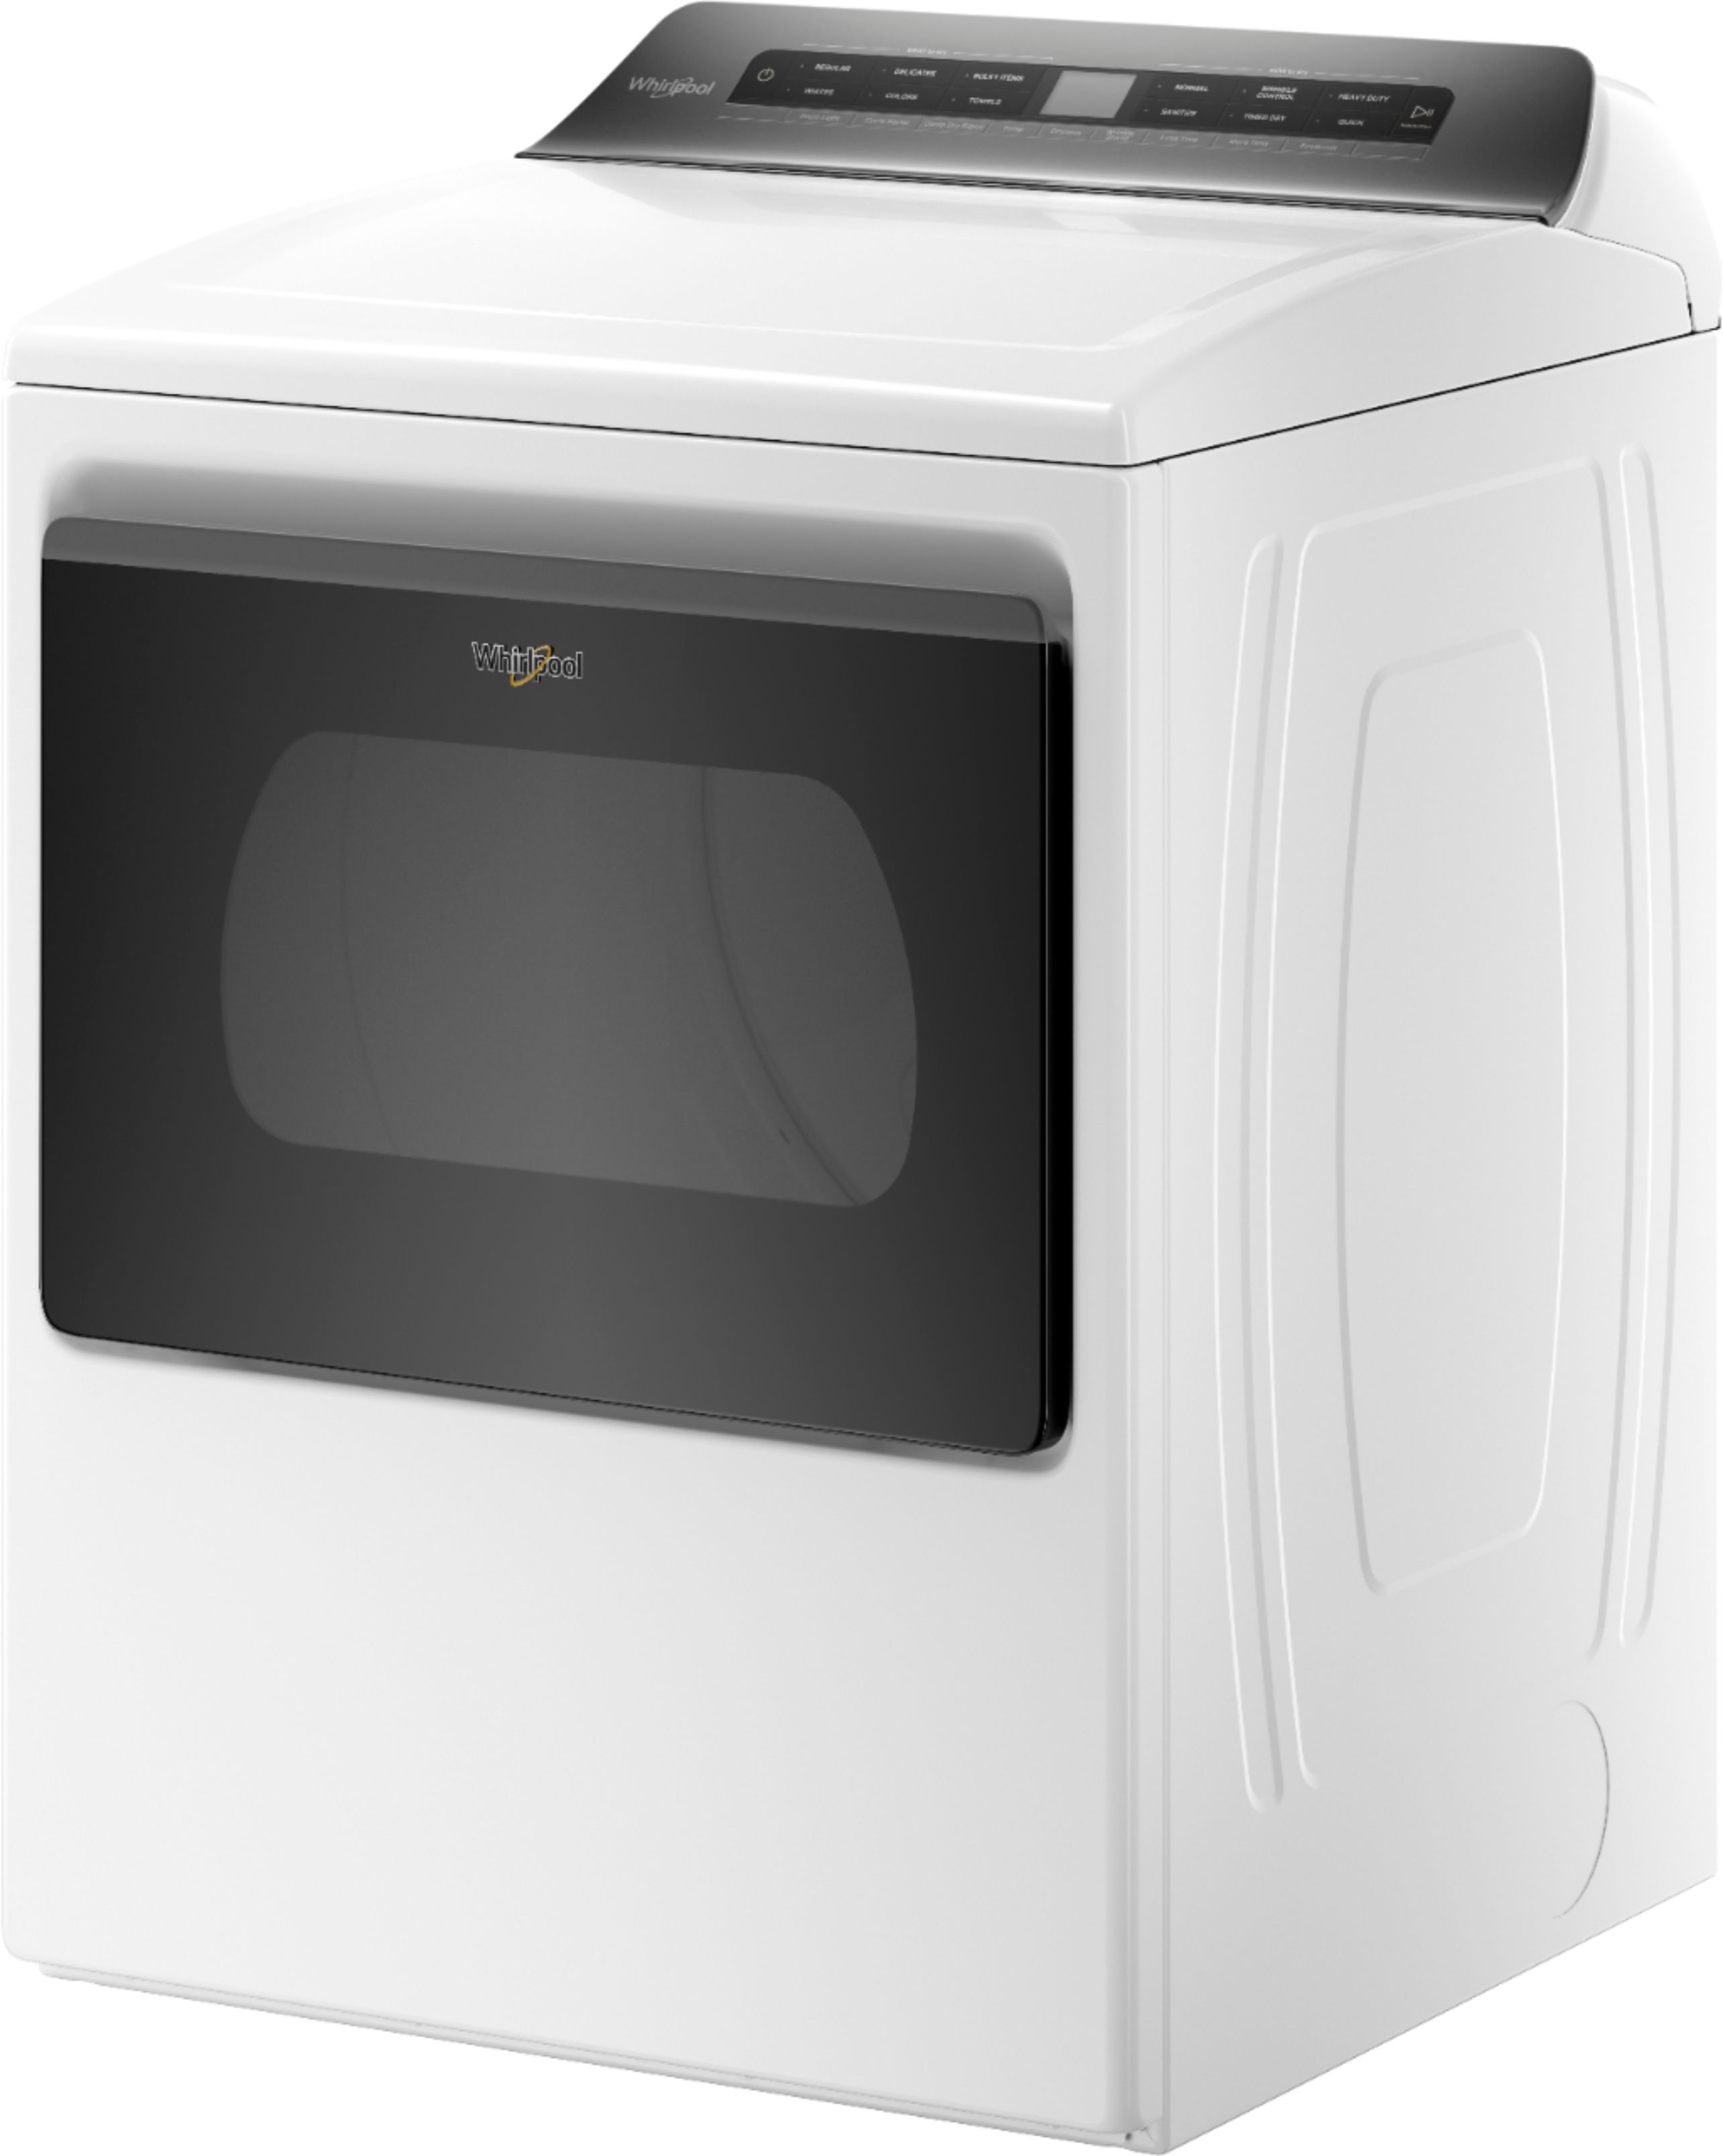 Left View: Whirlpool - 7.4 Cu. Ft. Electric Dryer with AccuDry Sensor Drying Technology - White